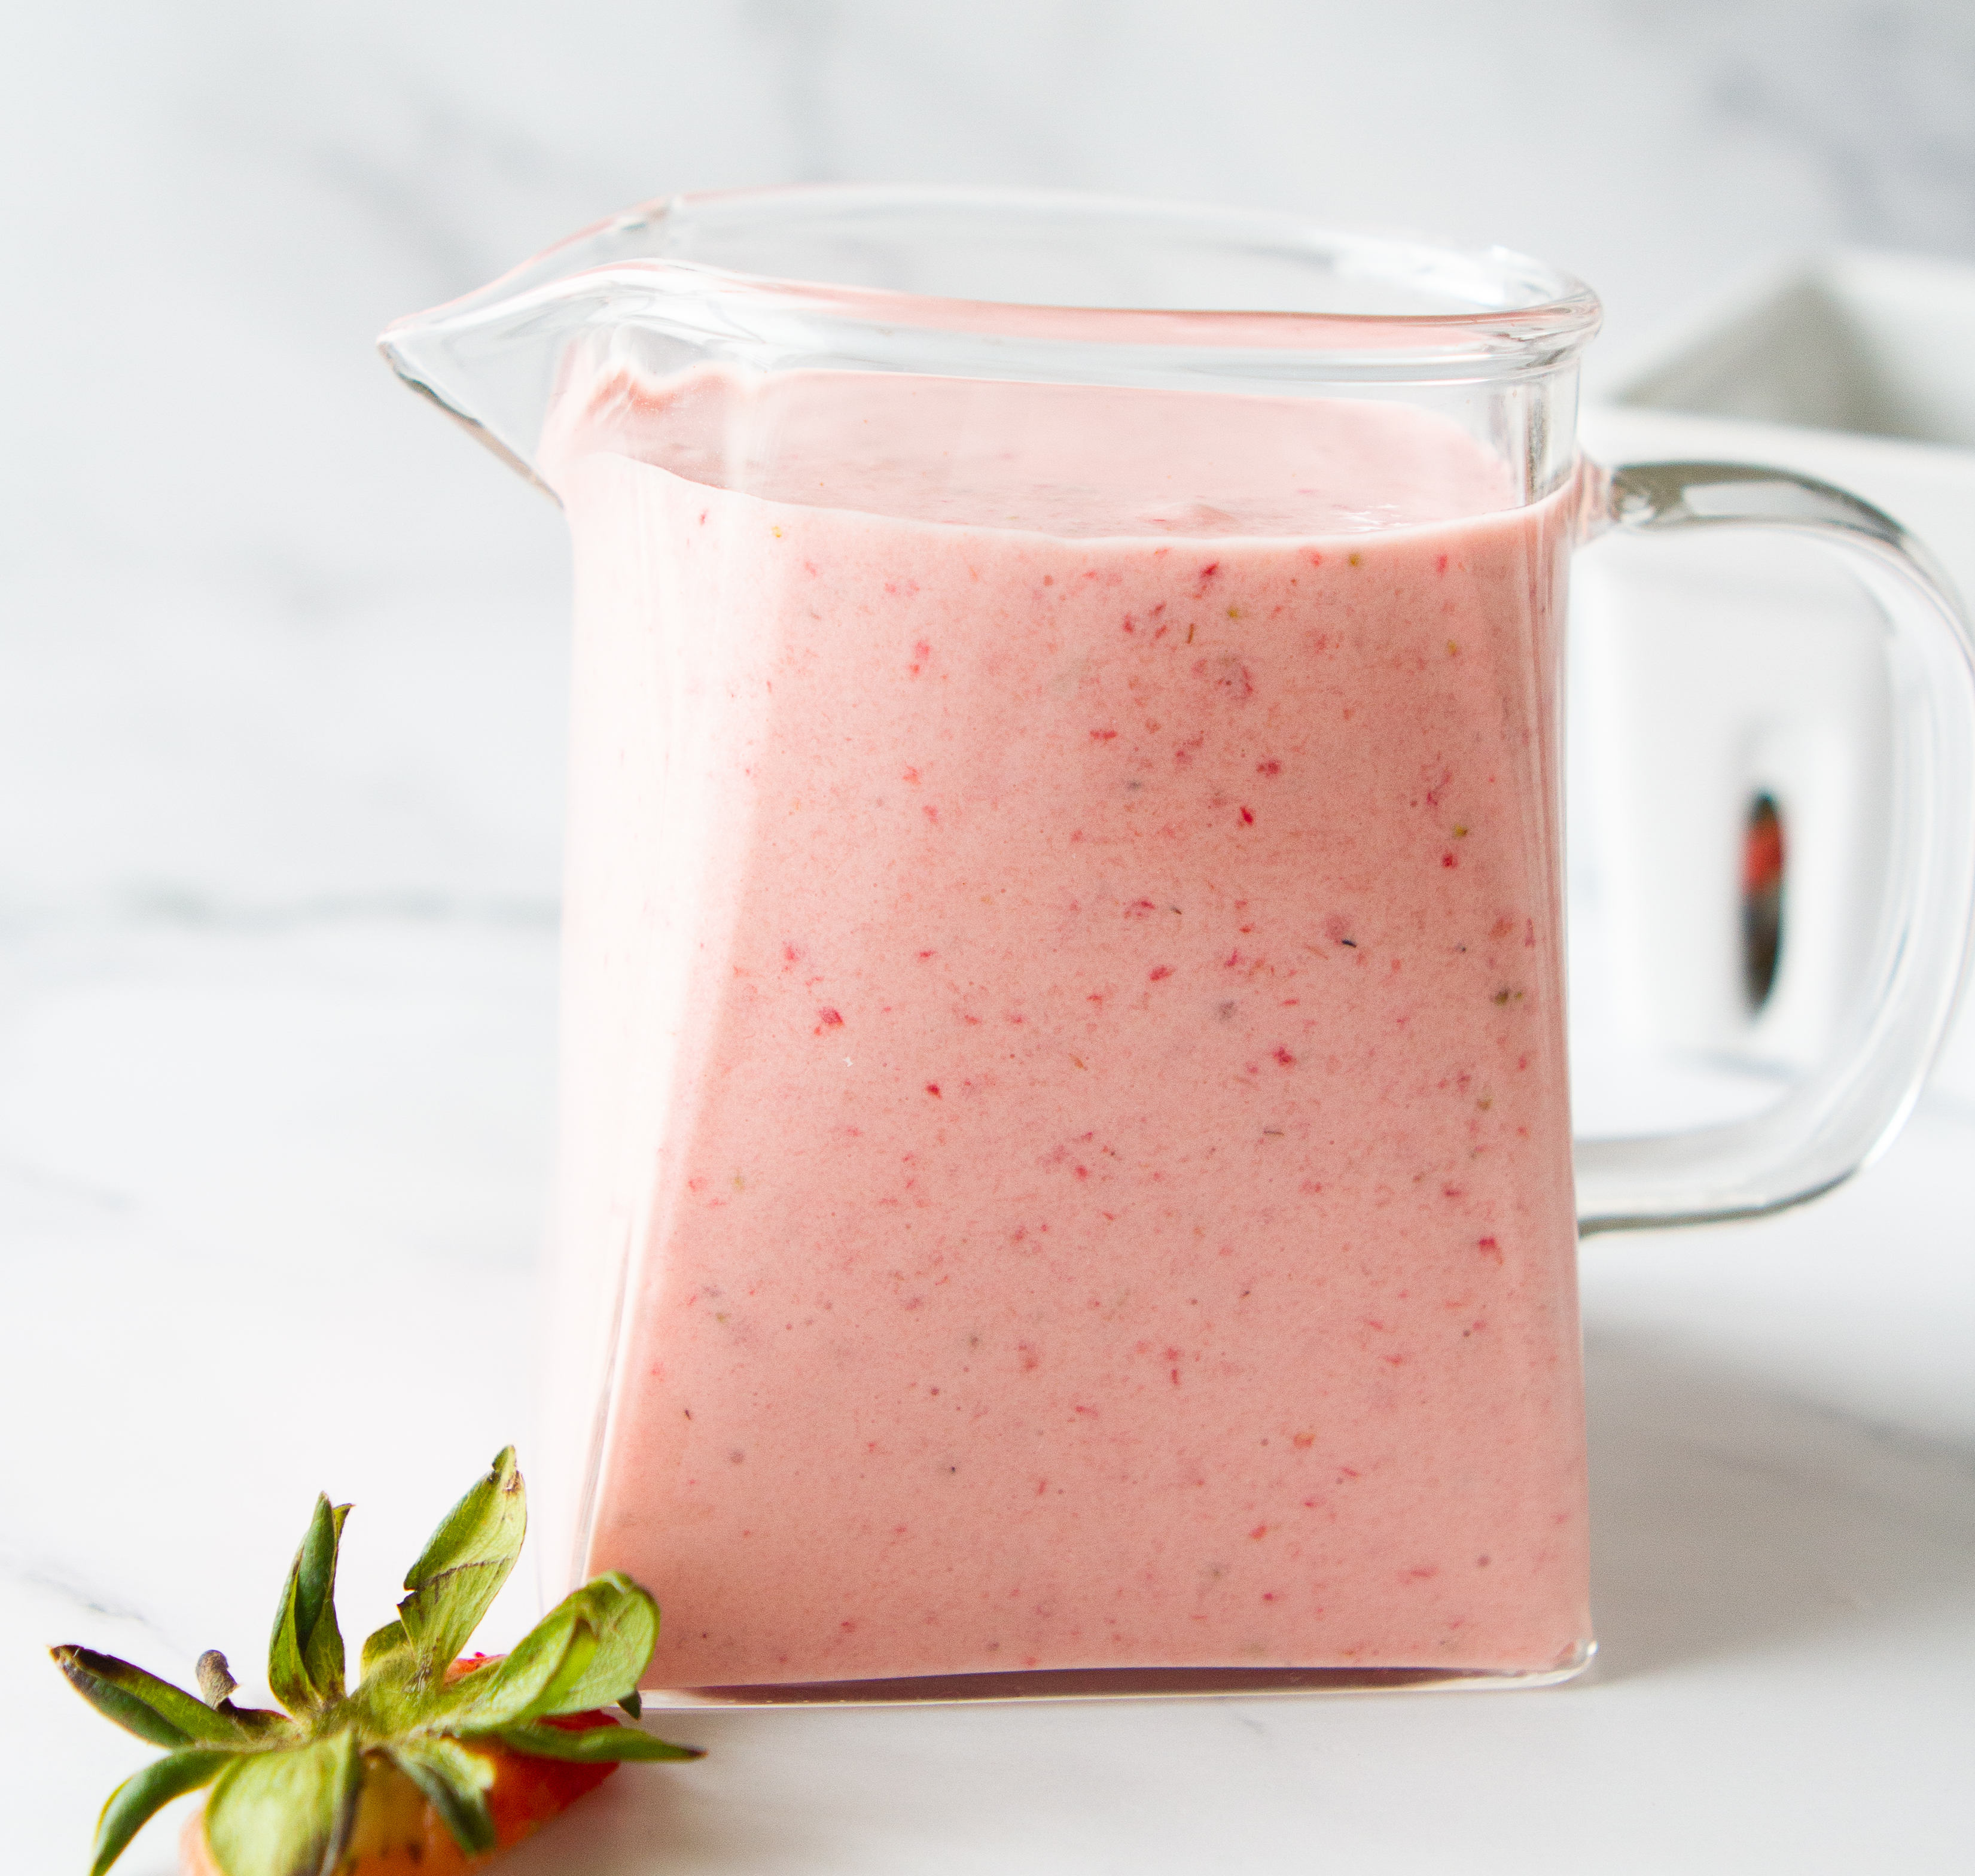 creamy strawberries in a glass pitcher